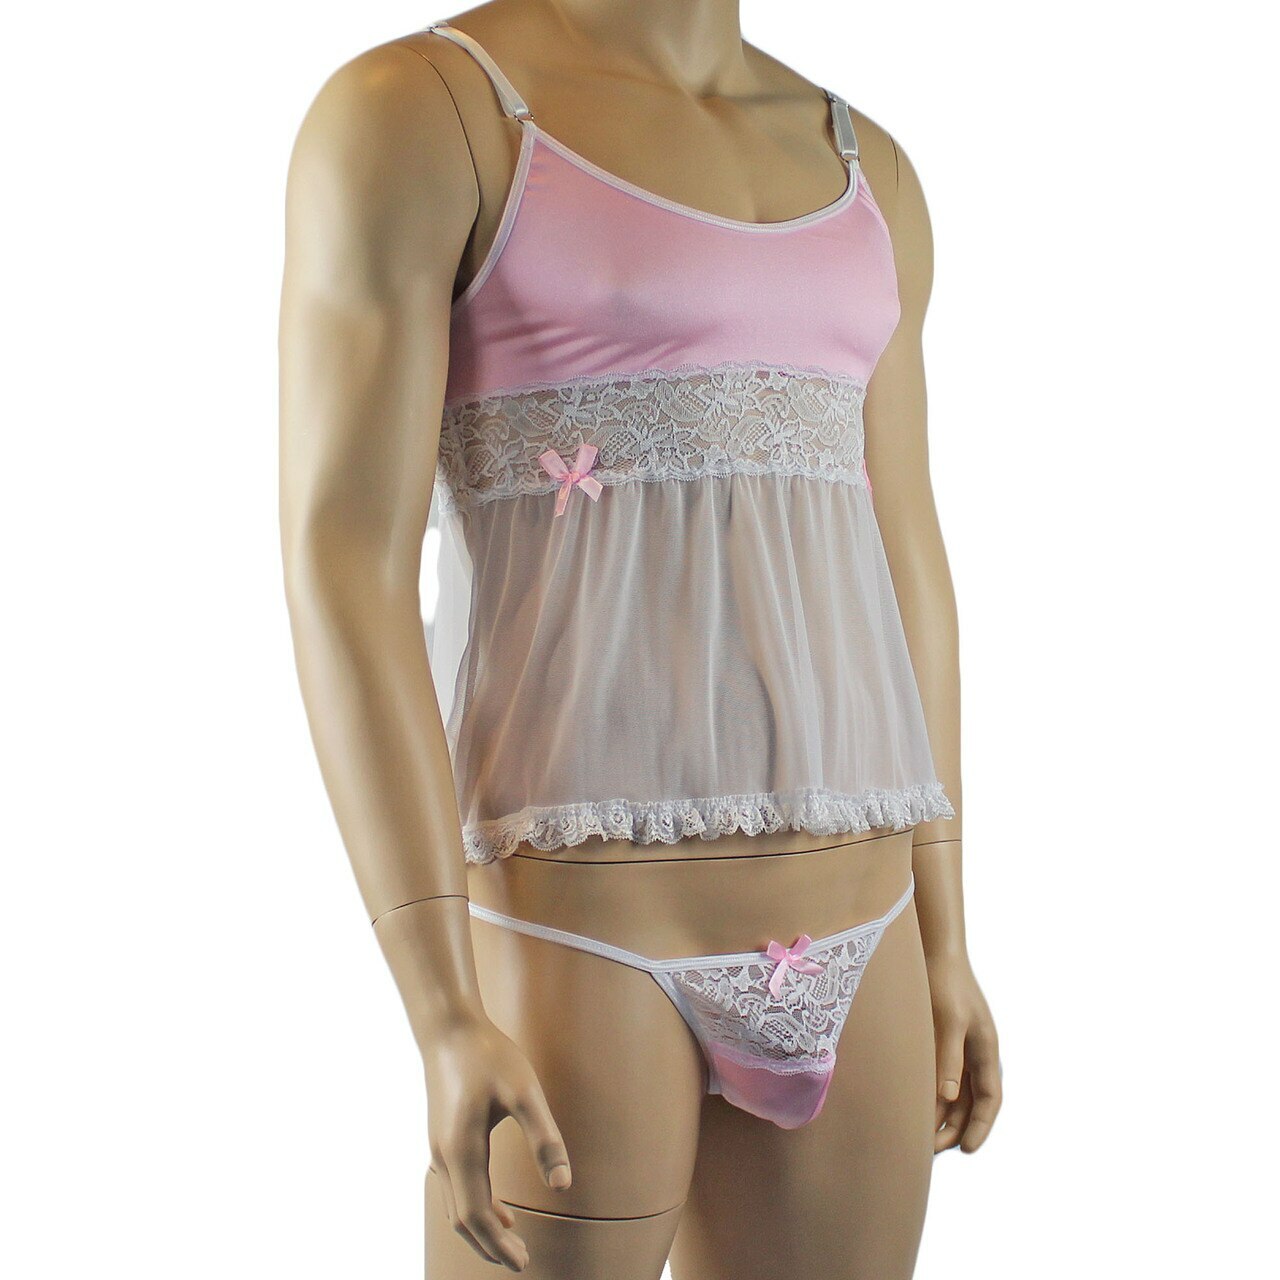 Mens Mini Babydoll Camisole & G string (light pink and white plus other colours)